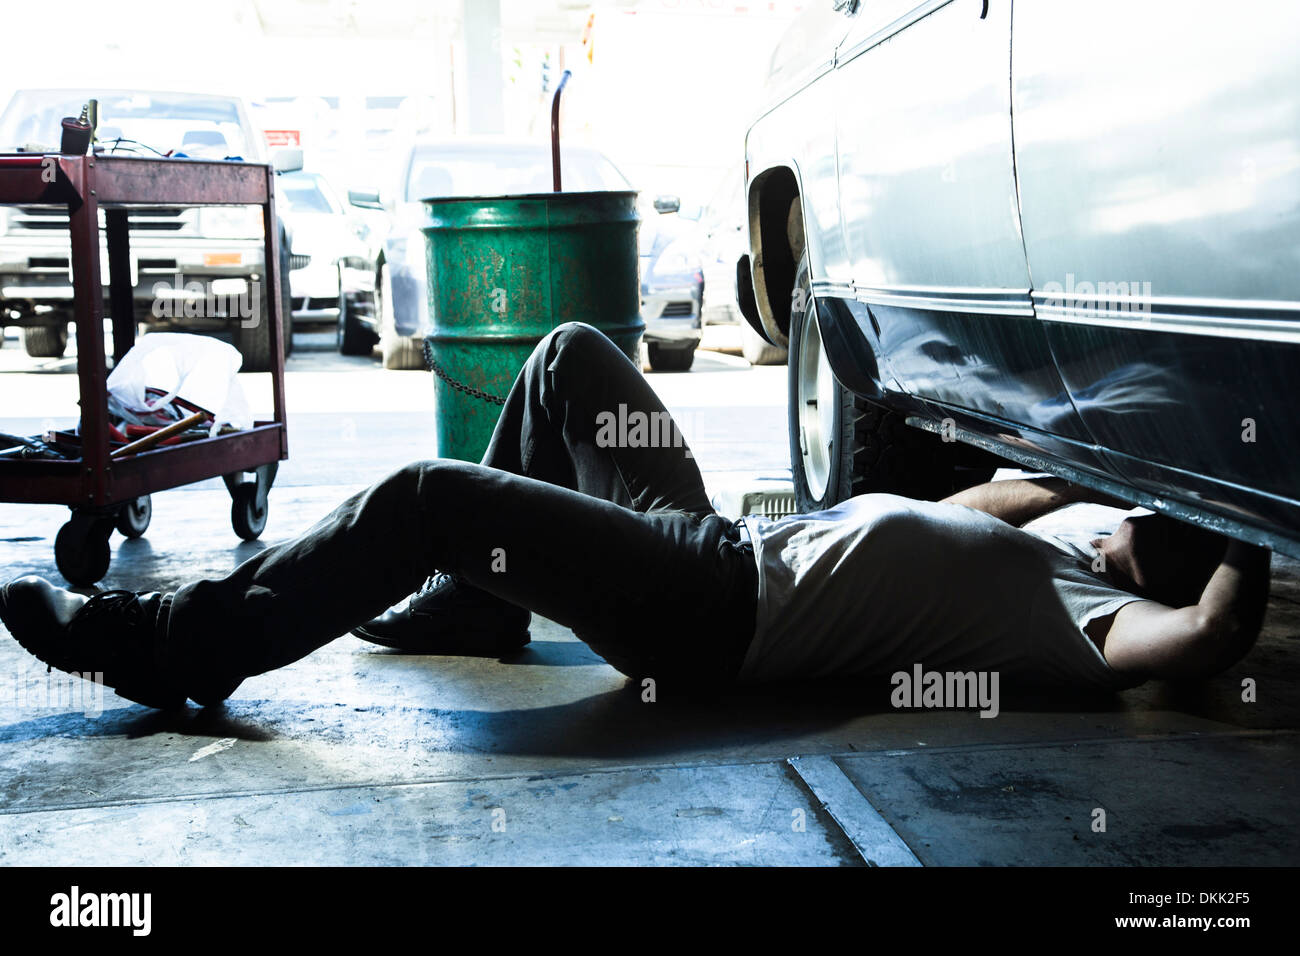 Male mechanic working on a car Stock Photo